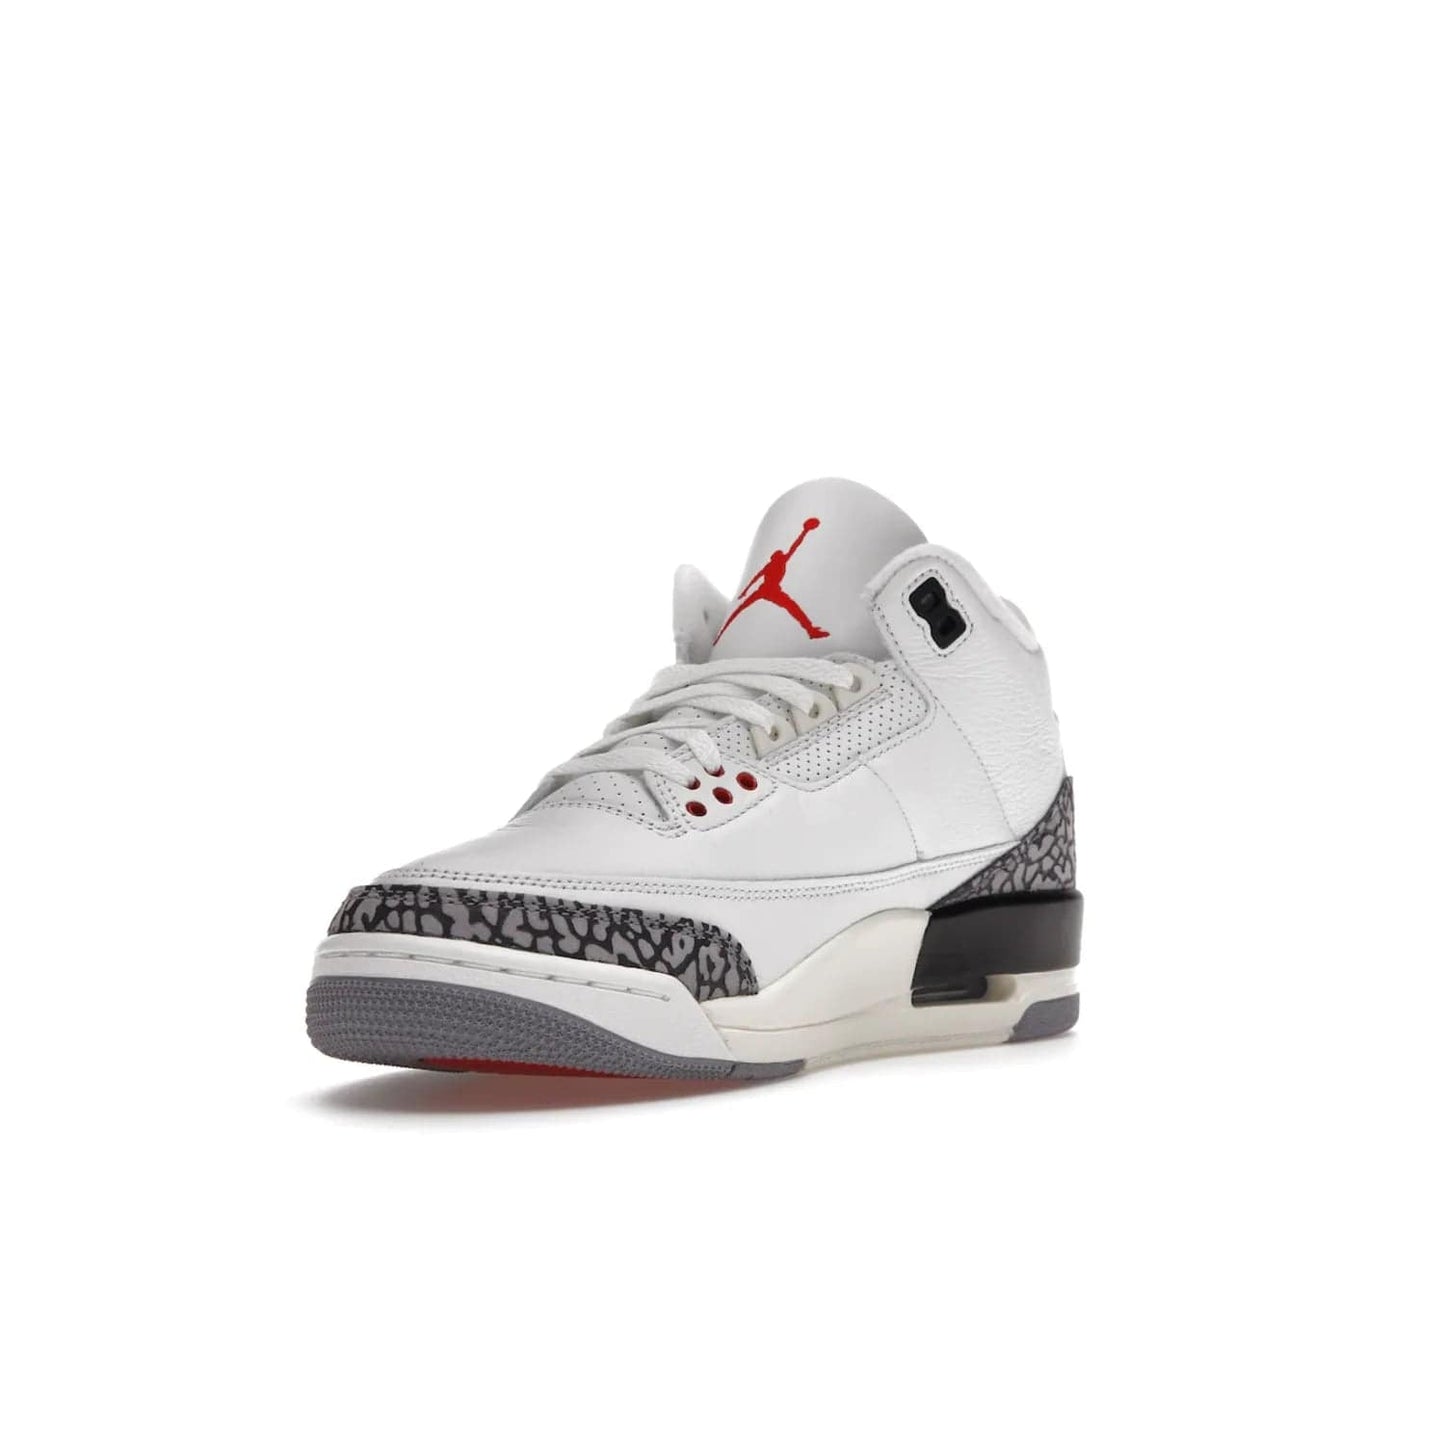 Jordan 3 Retro White Cement Reimagined - Image 14 - Only at www.BallersClubKickz.com - The Reimagined Air Jordan 3 Retro in a Summit White/Fire Red/Black/Cement Grey colorway is launching on March 11, 2023. Featuring a white leather upper, off-white midsoles and heel tabs, this vintage-look sneaker is a must-have.